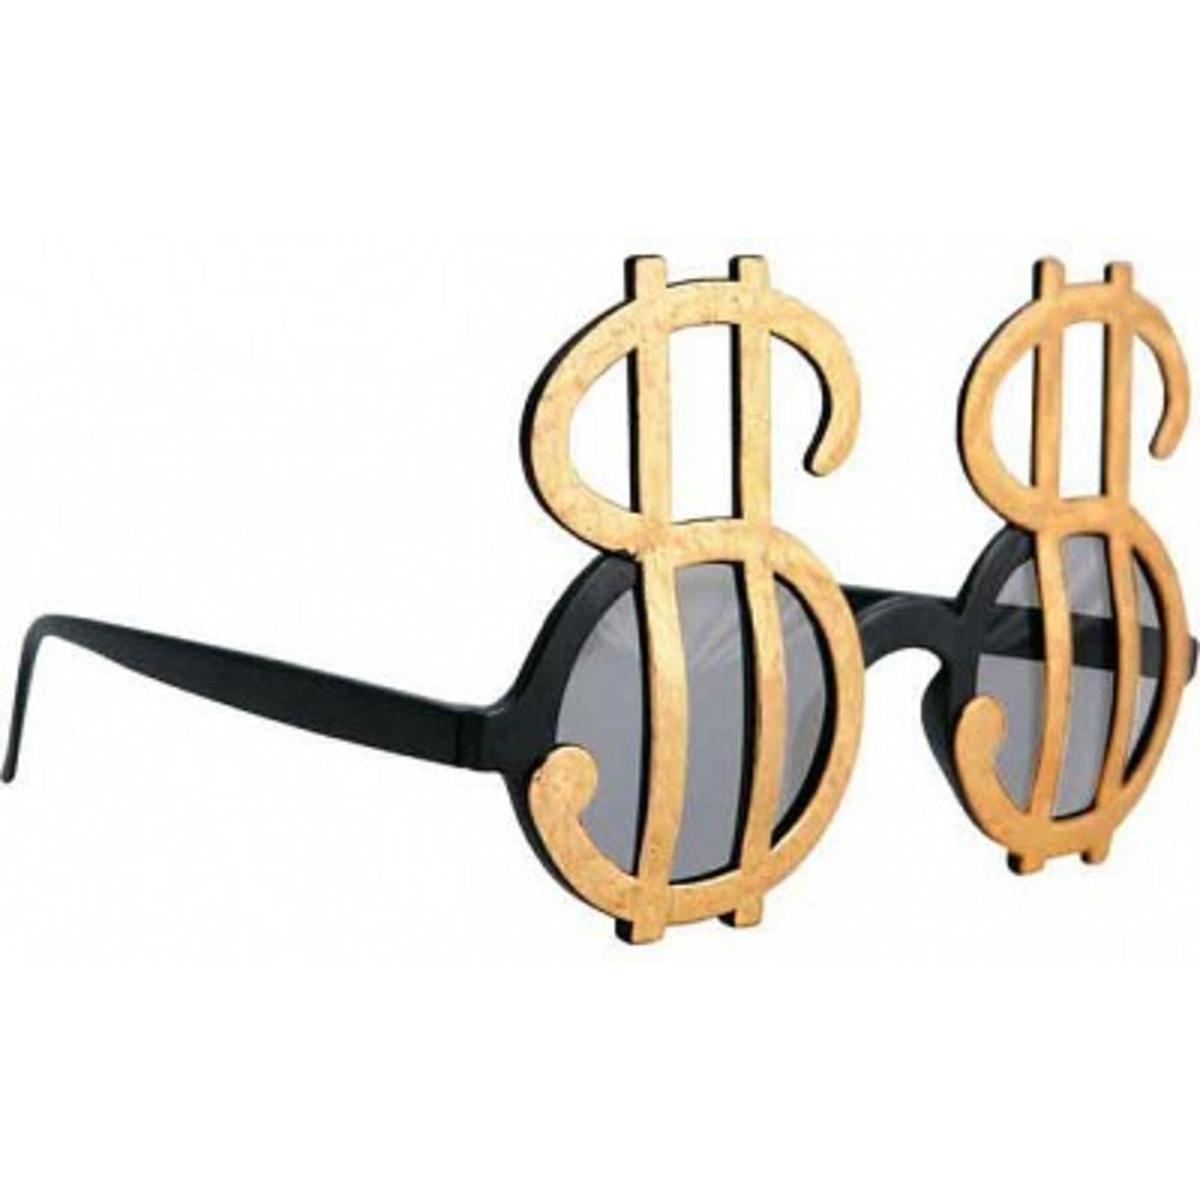 Lunettes dollar - Taille adulte